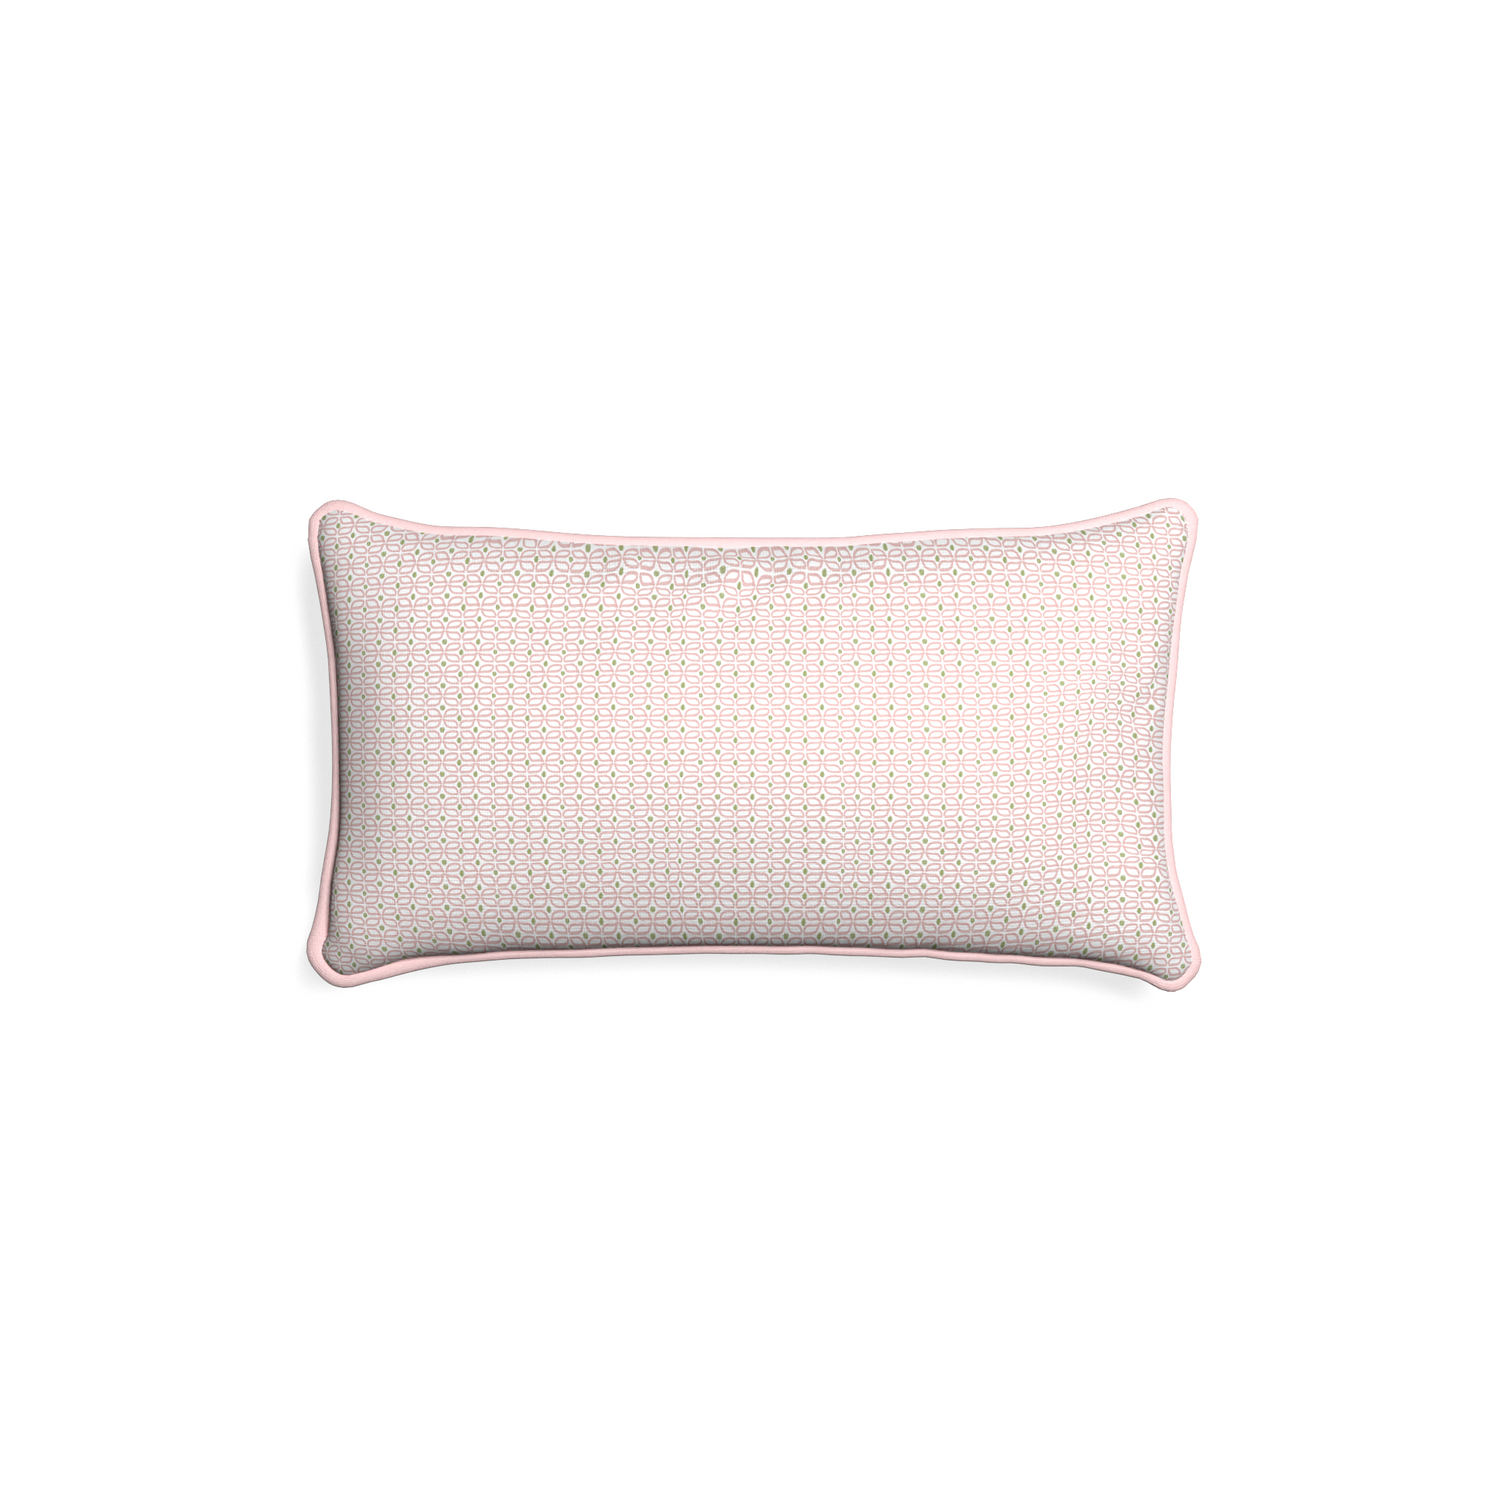 Petite-lumbar loomi pink custom pink geometricpillow with petal piping on white background